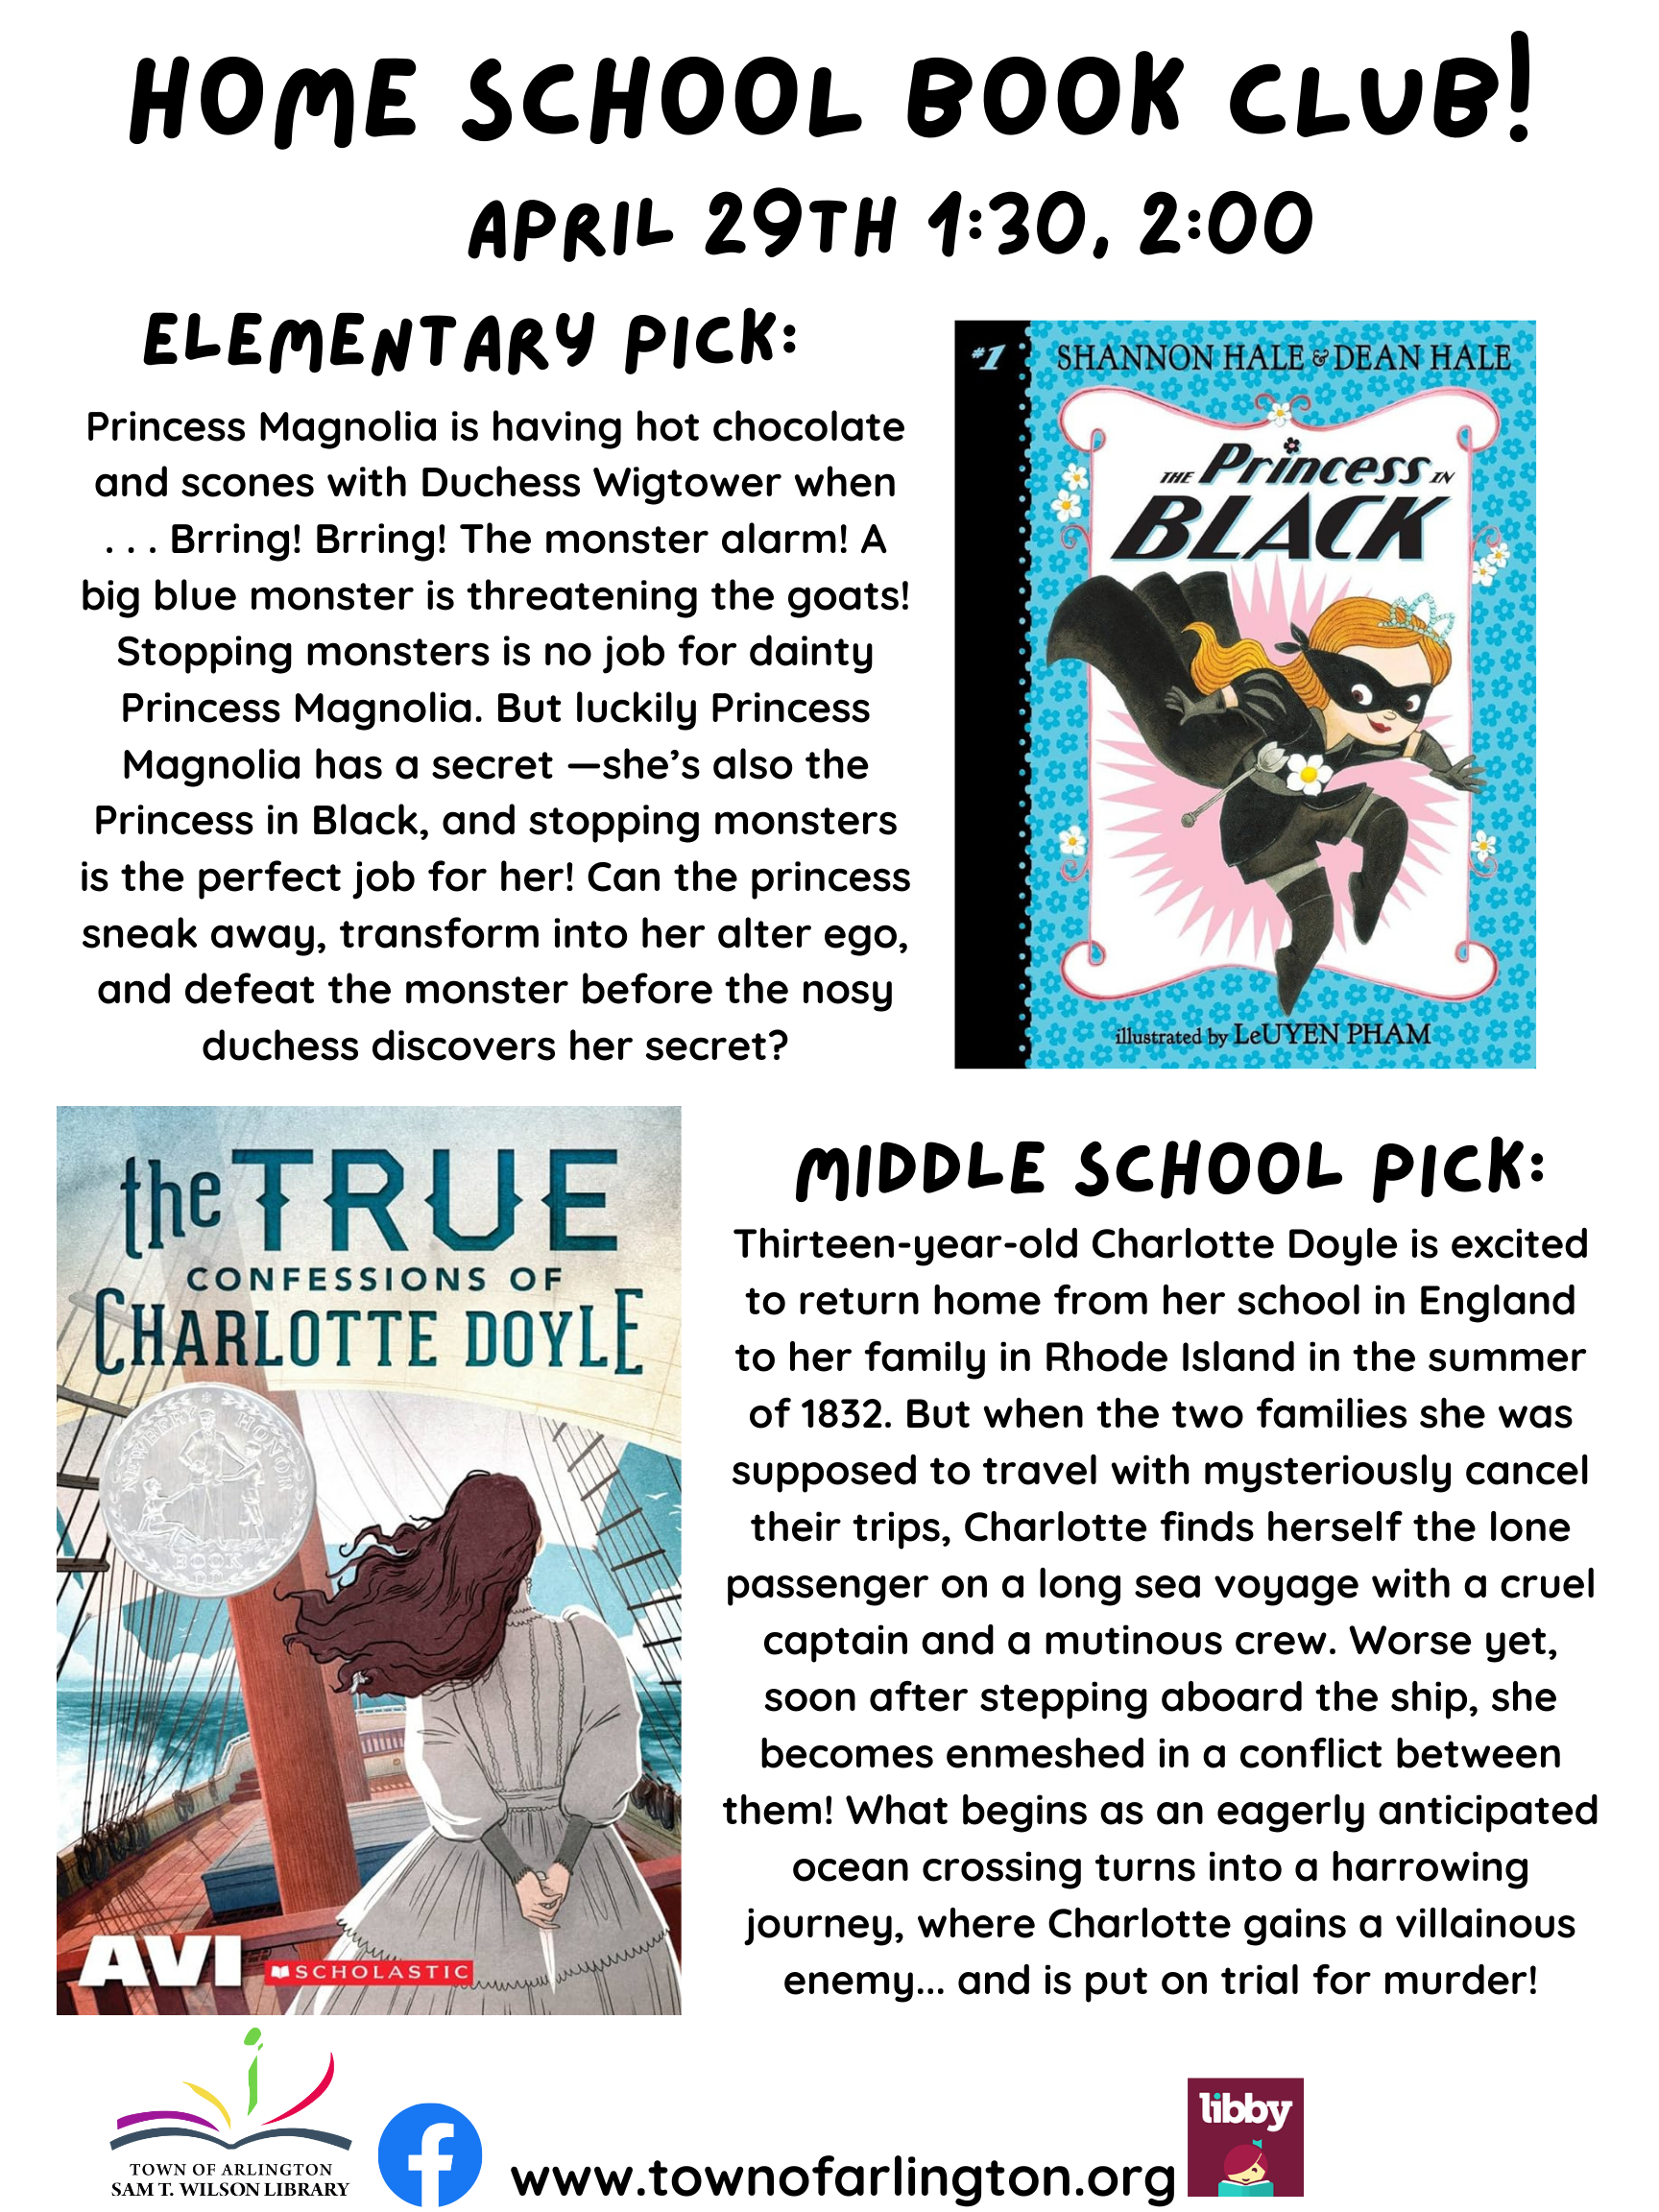 Homeschool Book Clubs, April 29th, 1:30pm elementary for The Princess in Black, 2pm middle for The True Confessions of Charlotte Doyle